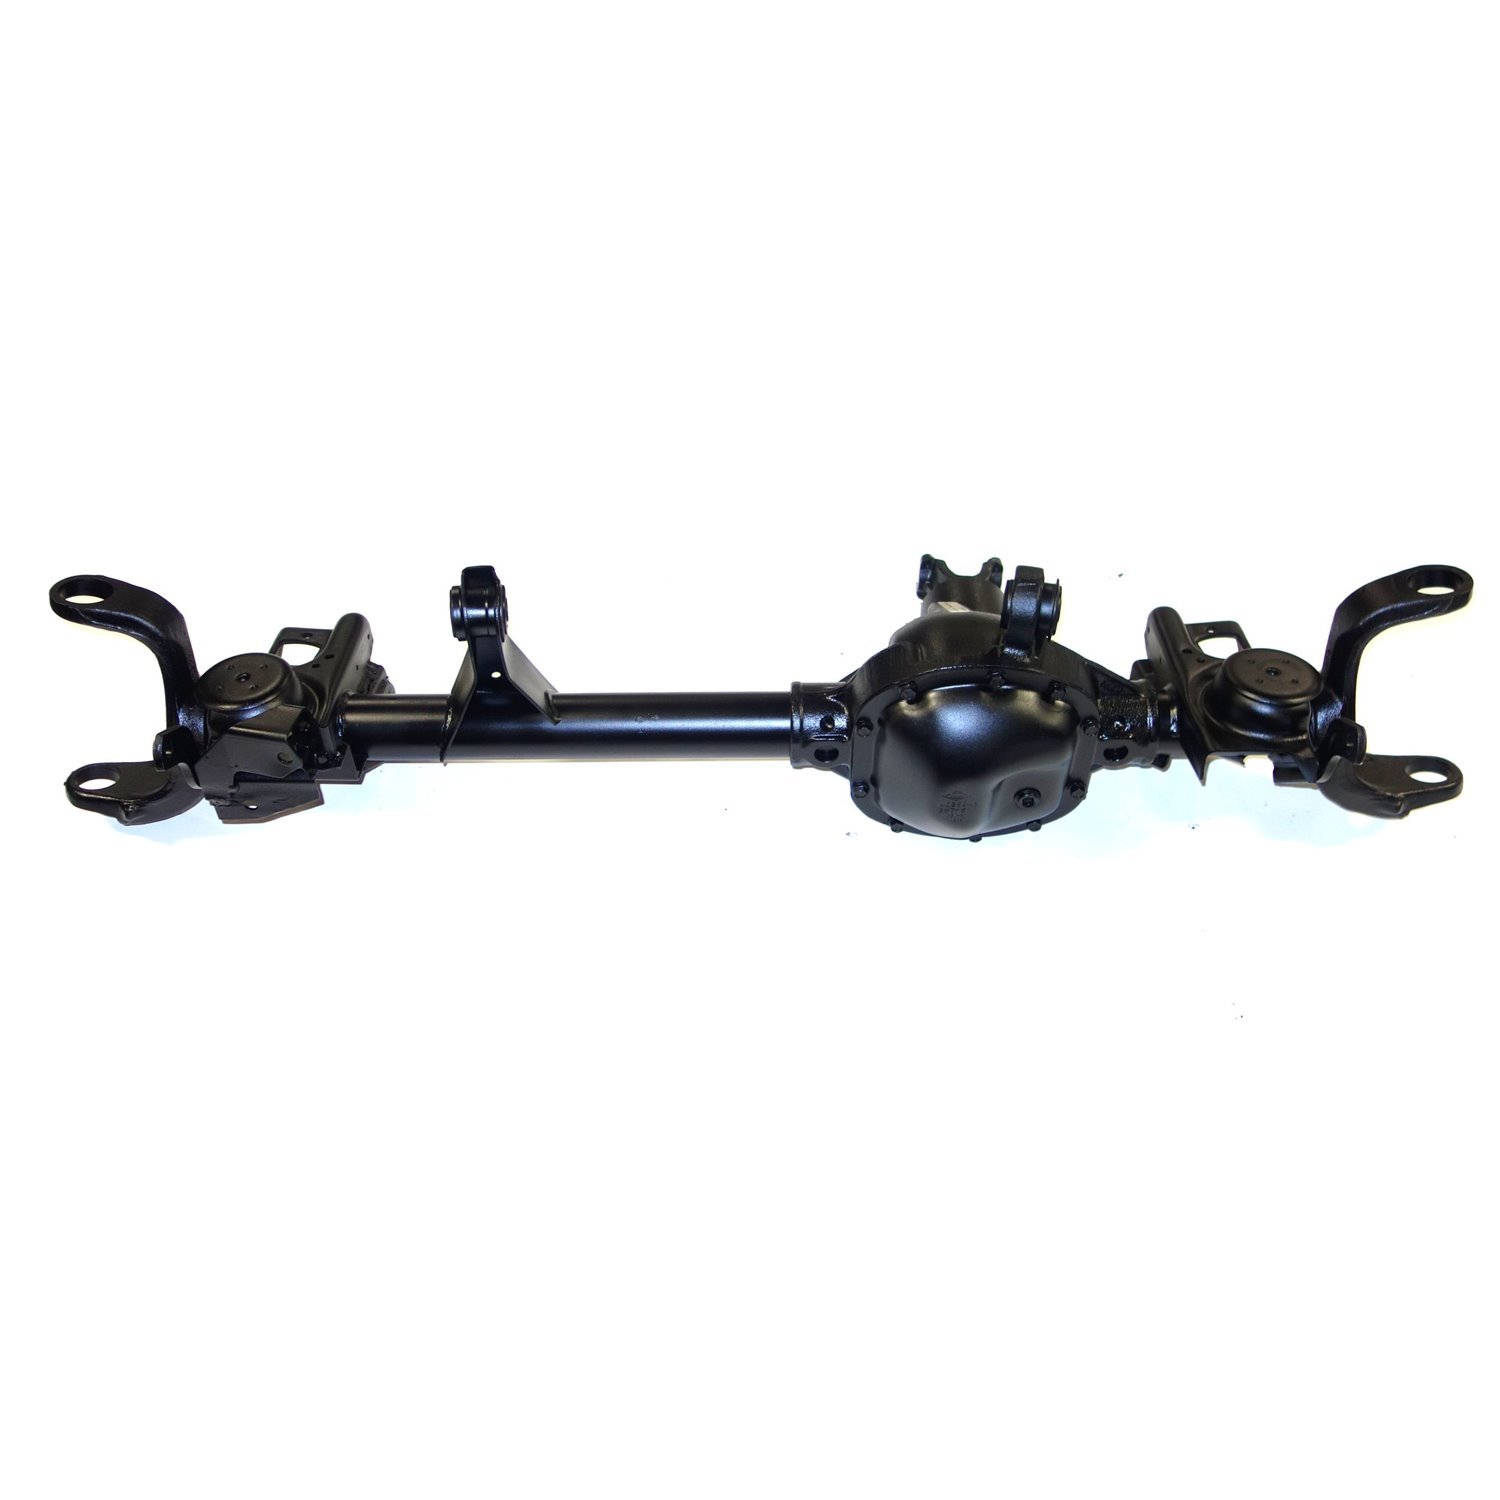 Remanufactured Complete Axle Assembly for Dana 30 90-95 Jeep Wrangler 3.73 Ratio w/o ABS